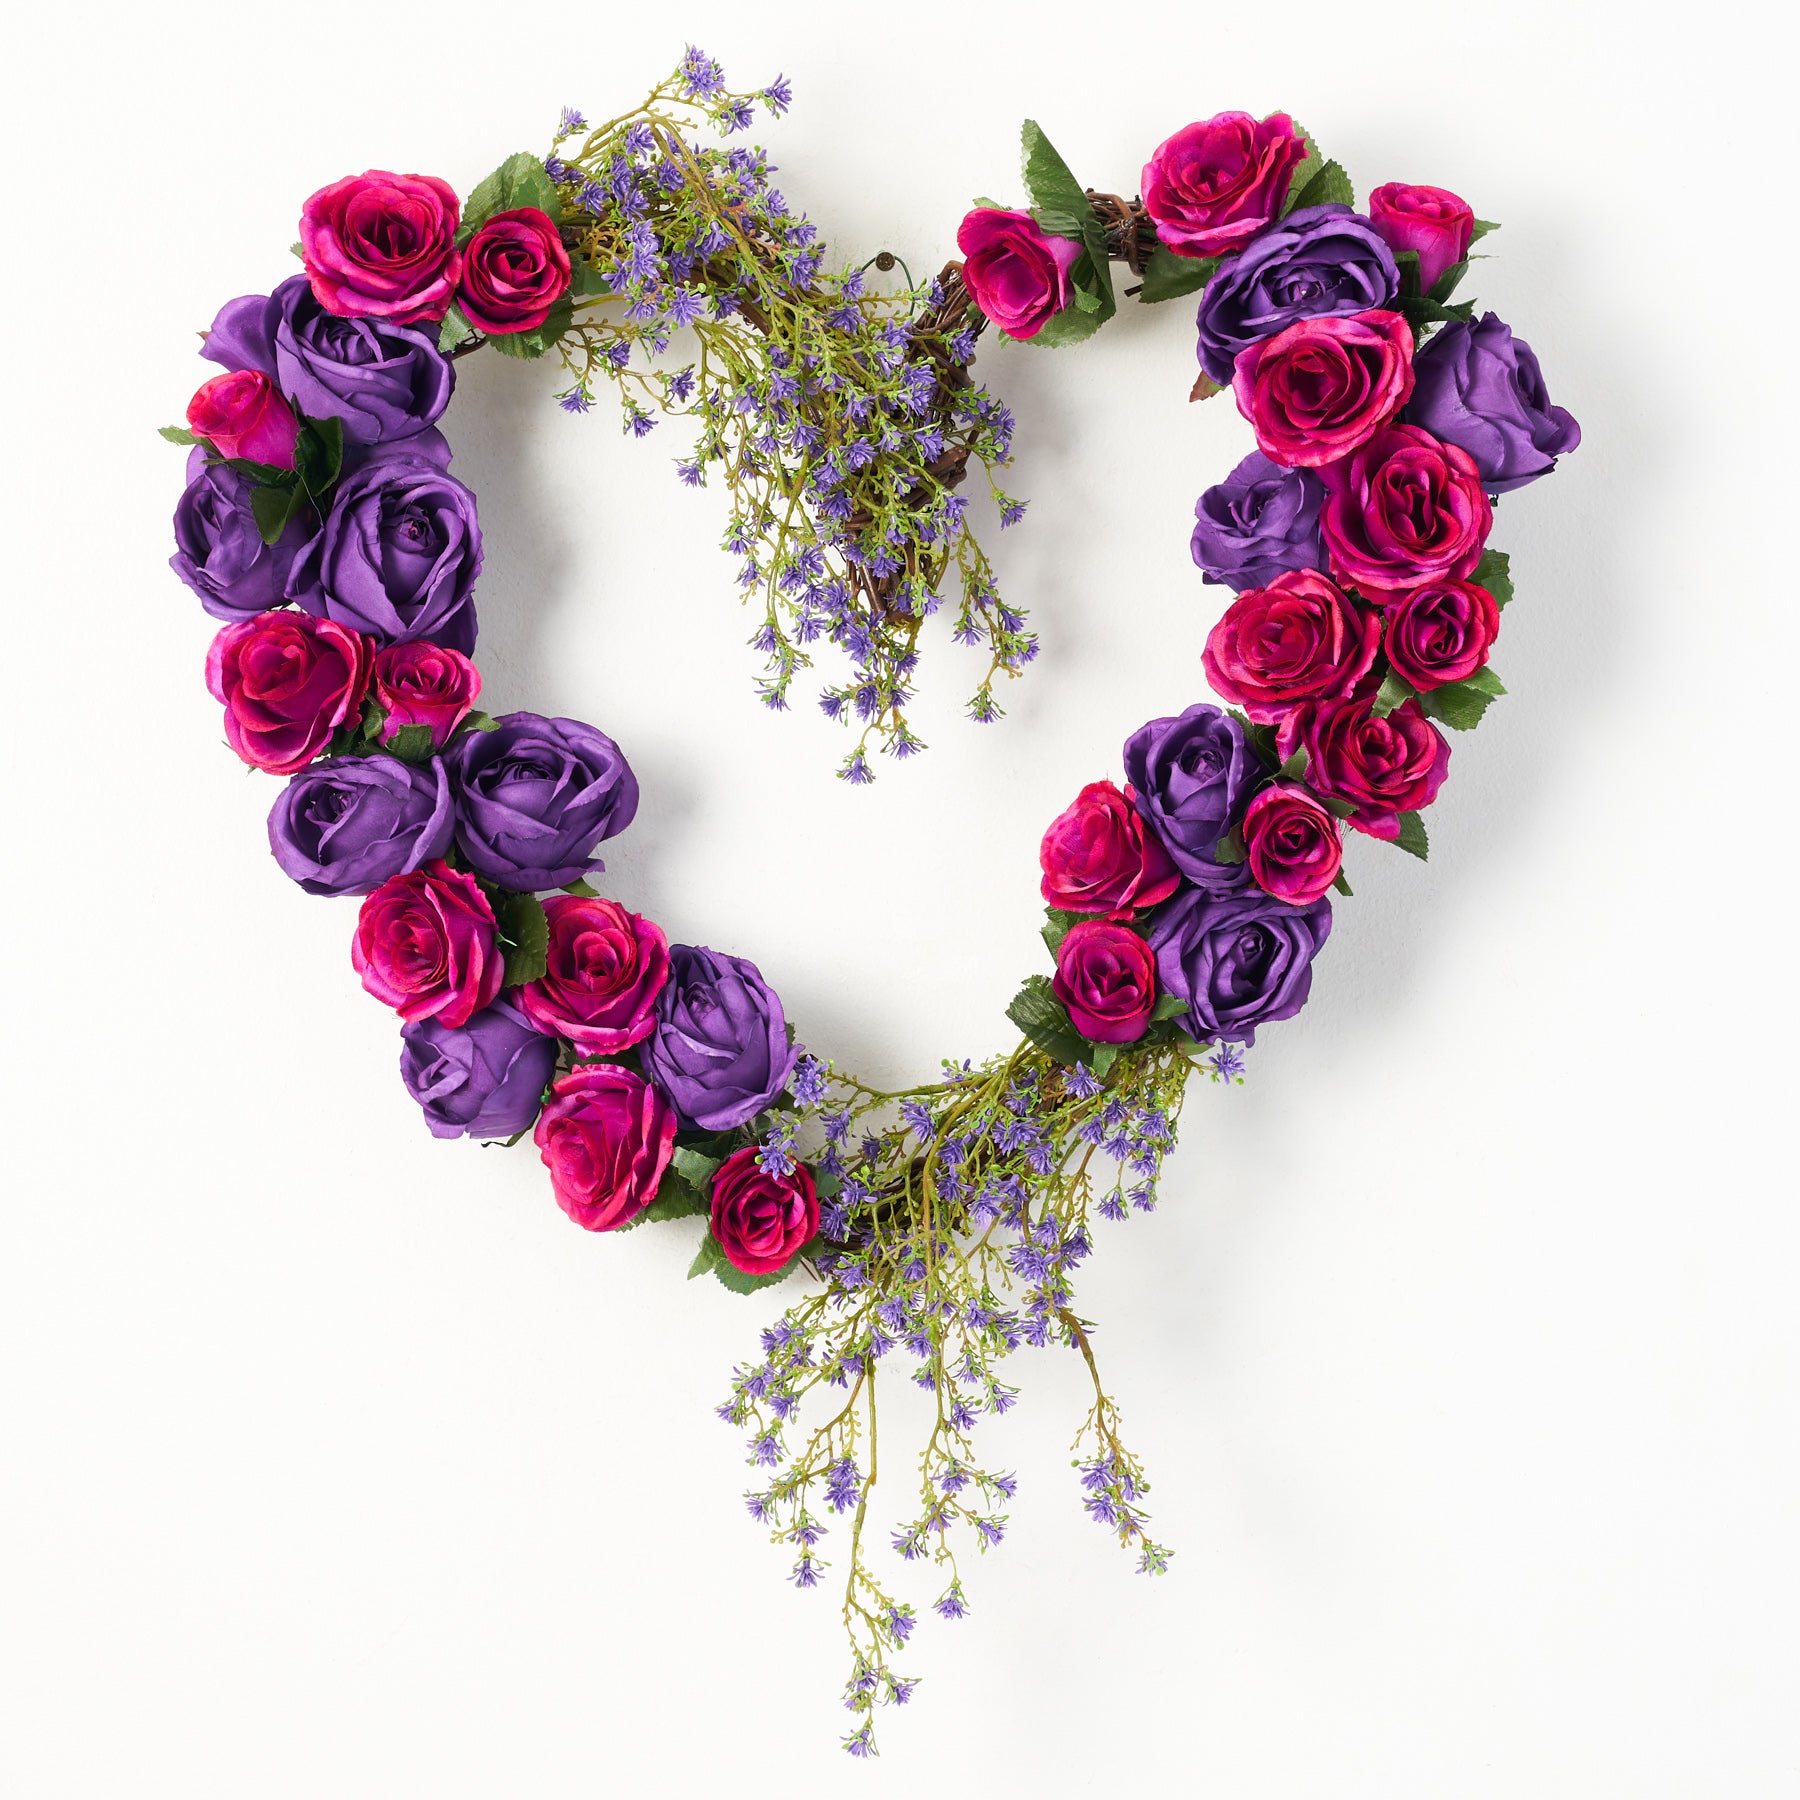 Dogrose: Embroidered heart shaped wreath - Stitch Floral